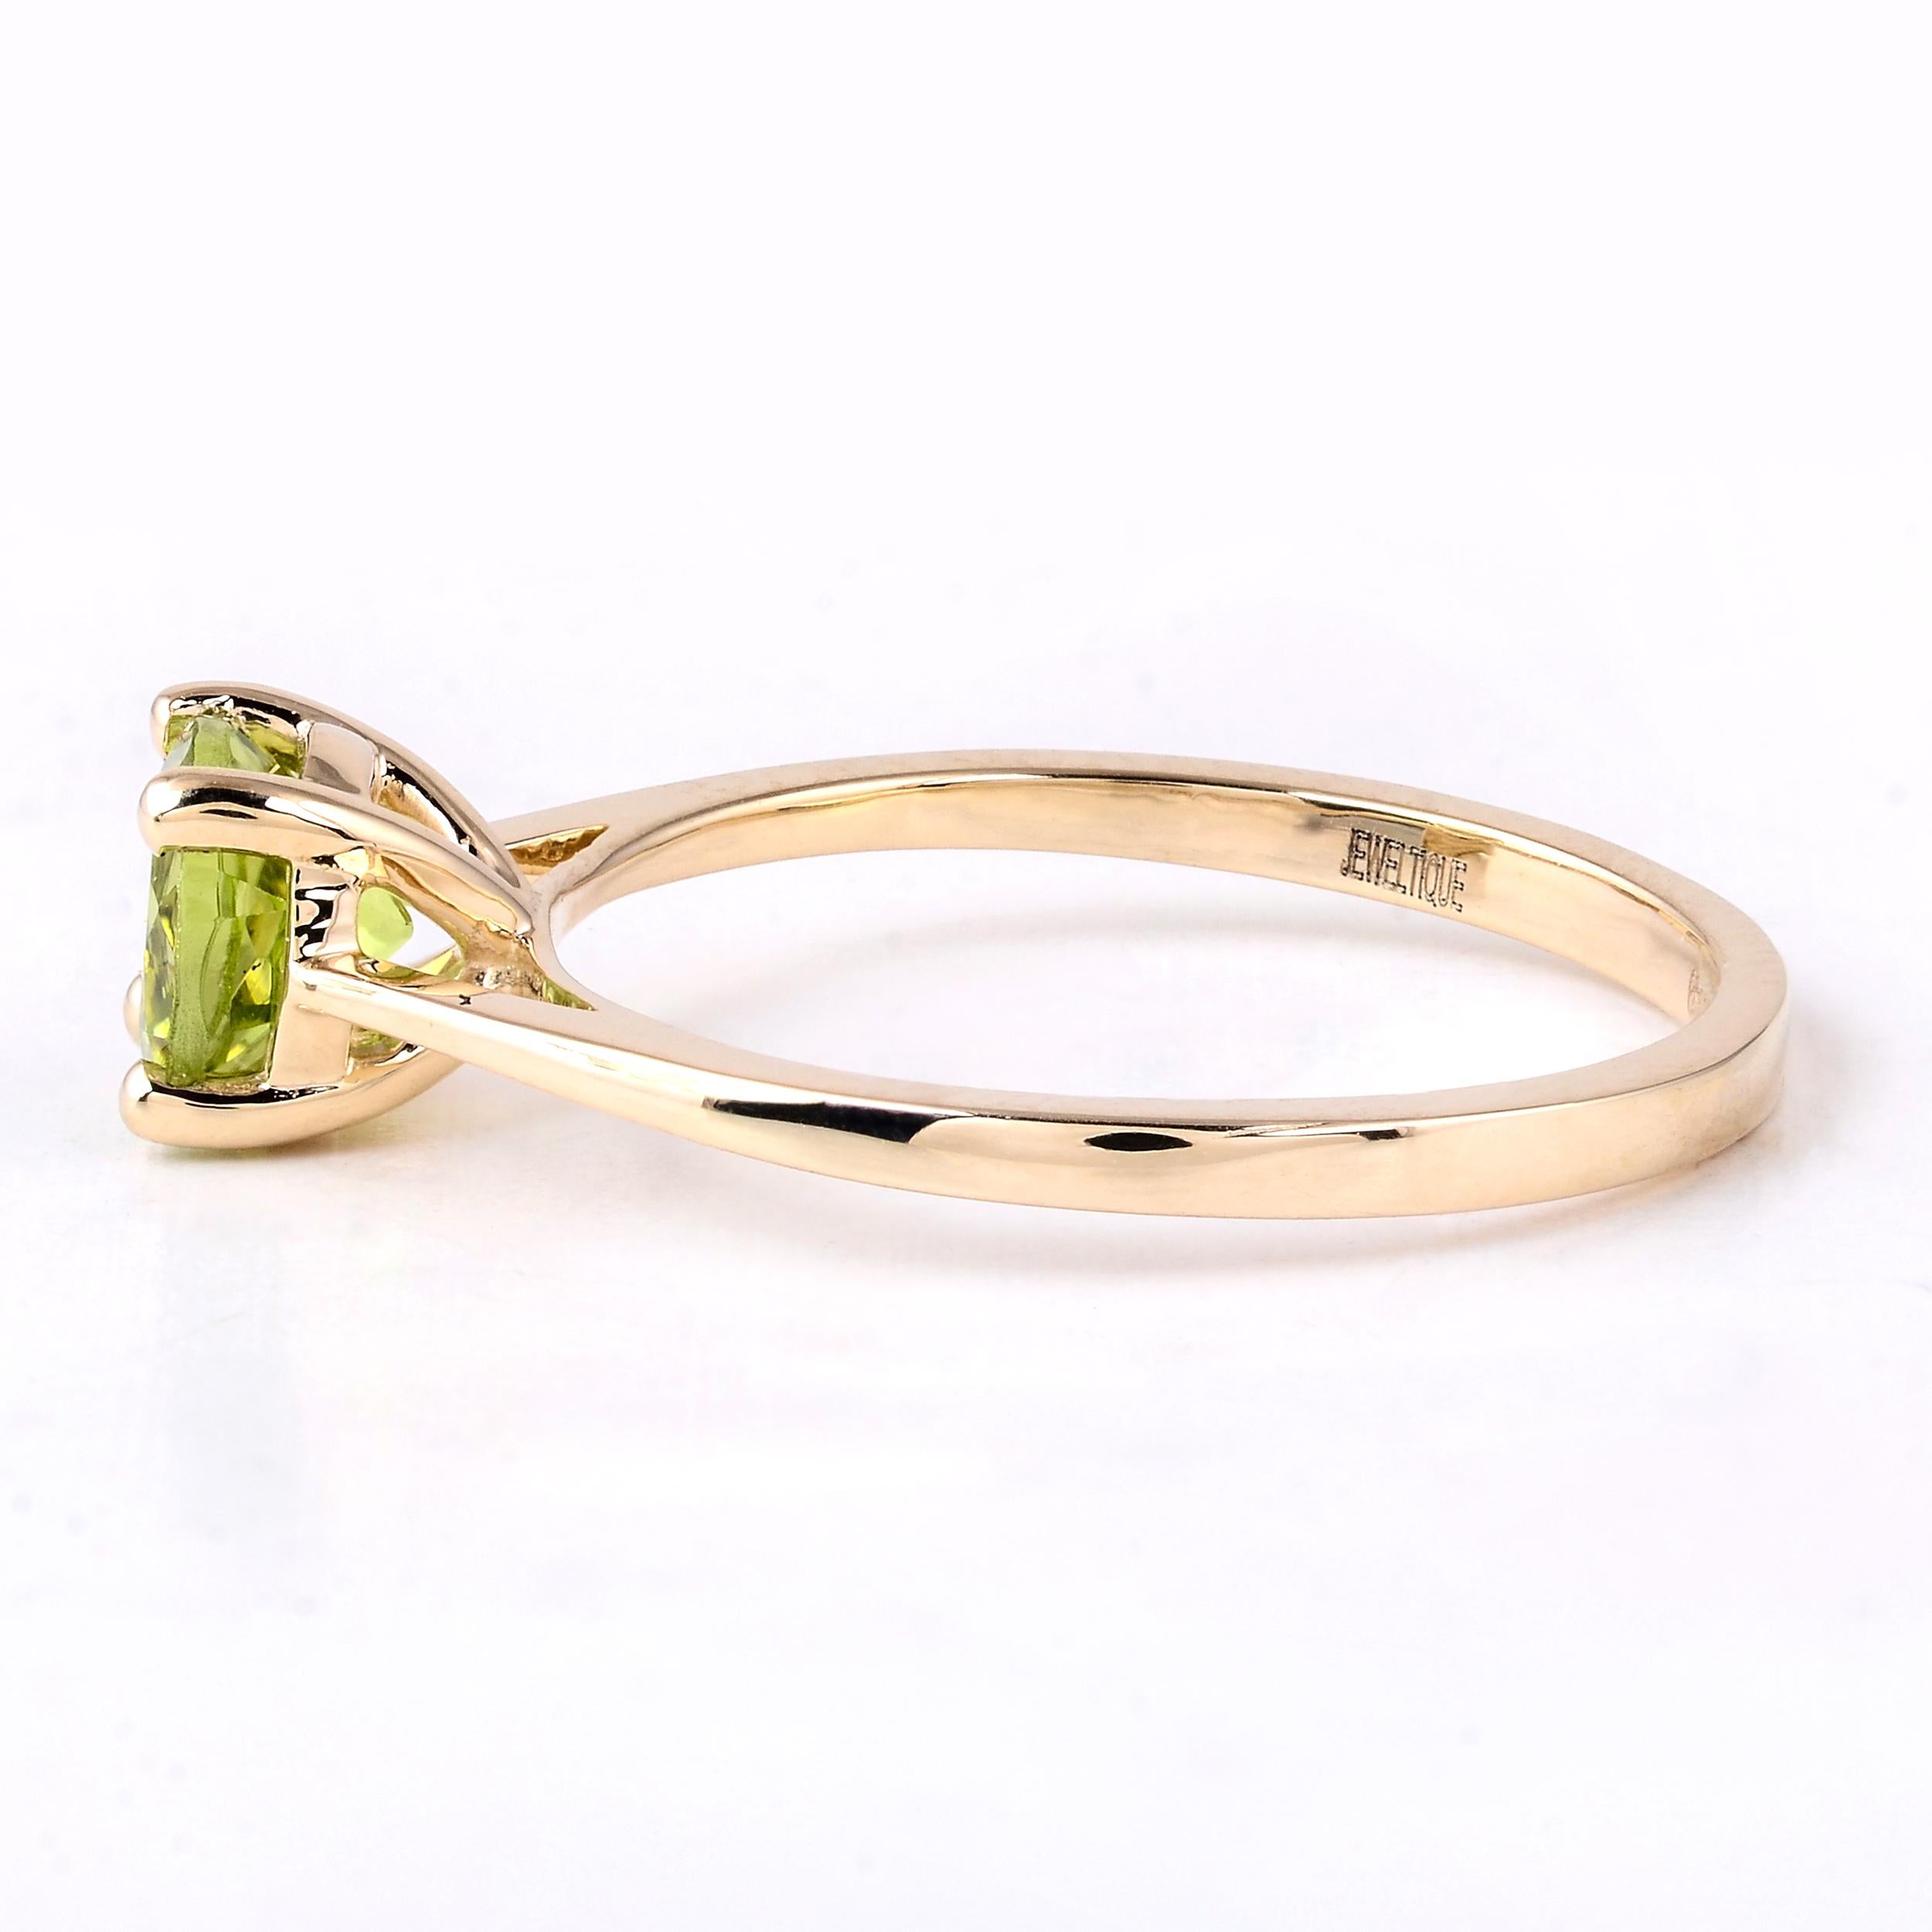 Elegant 14K Peridot Cocktail Ring, Size 7 - Stunning Statement Jewelry Piece For Sale 1